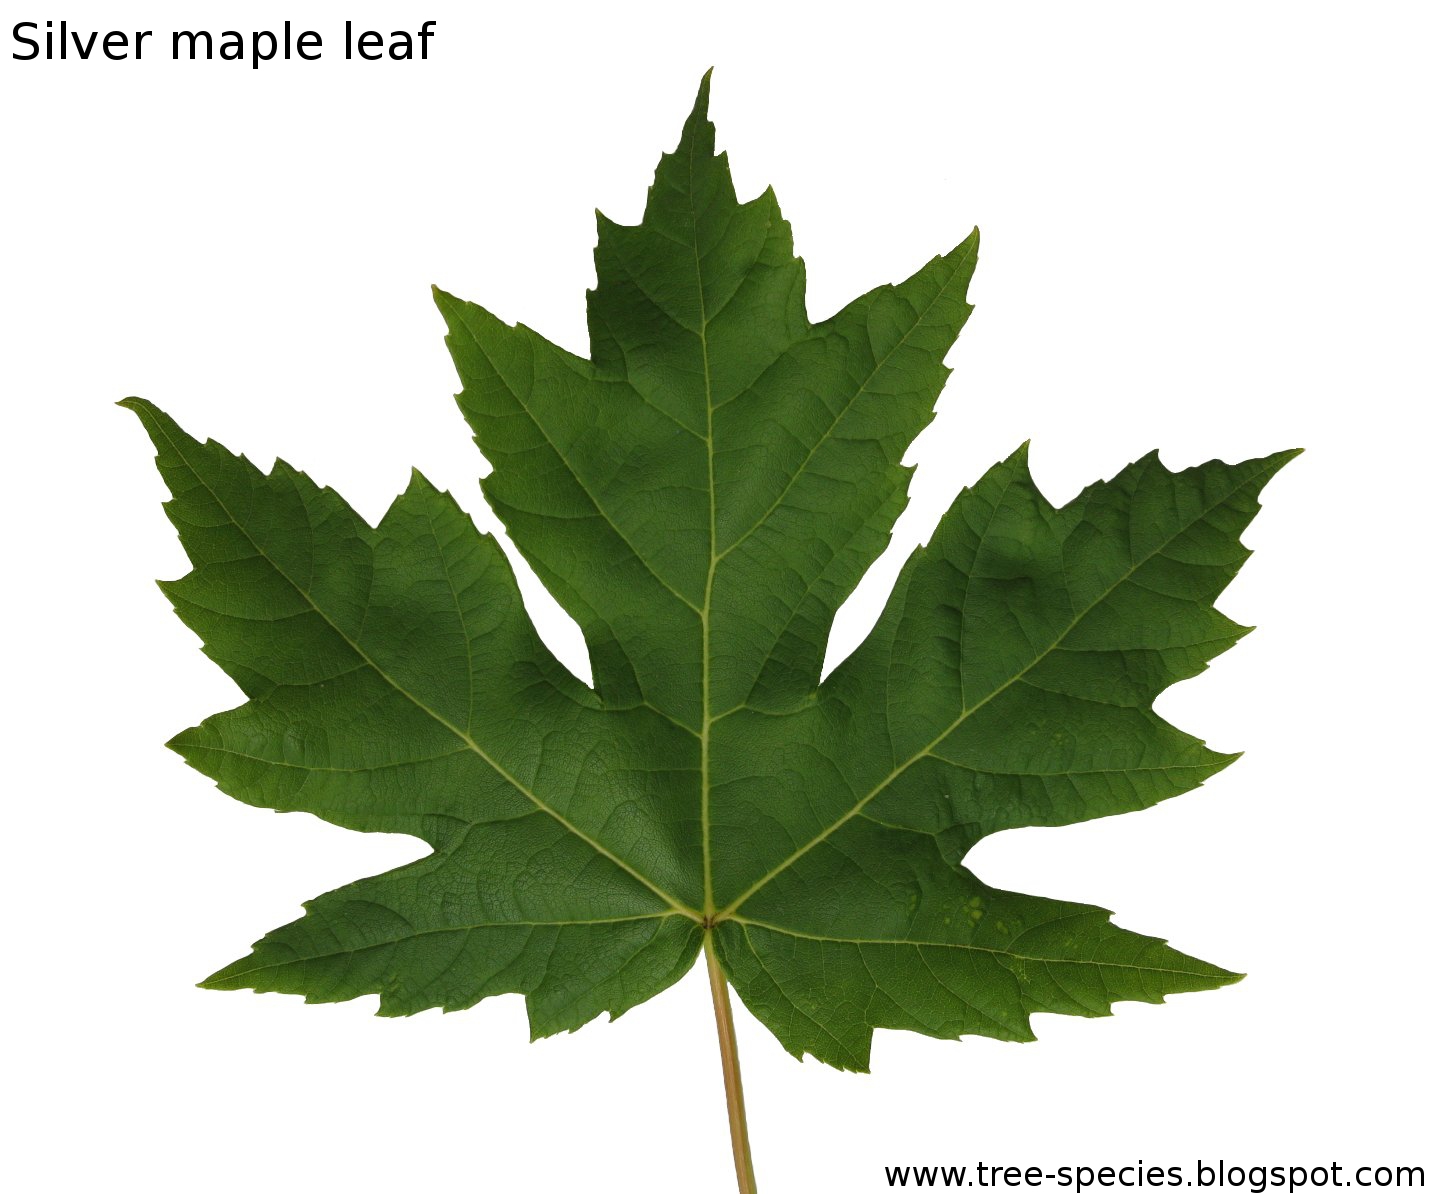 The World?s Tree Species: Silver maple leaf